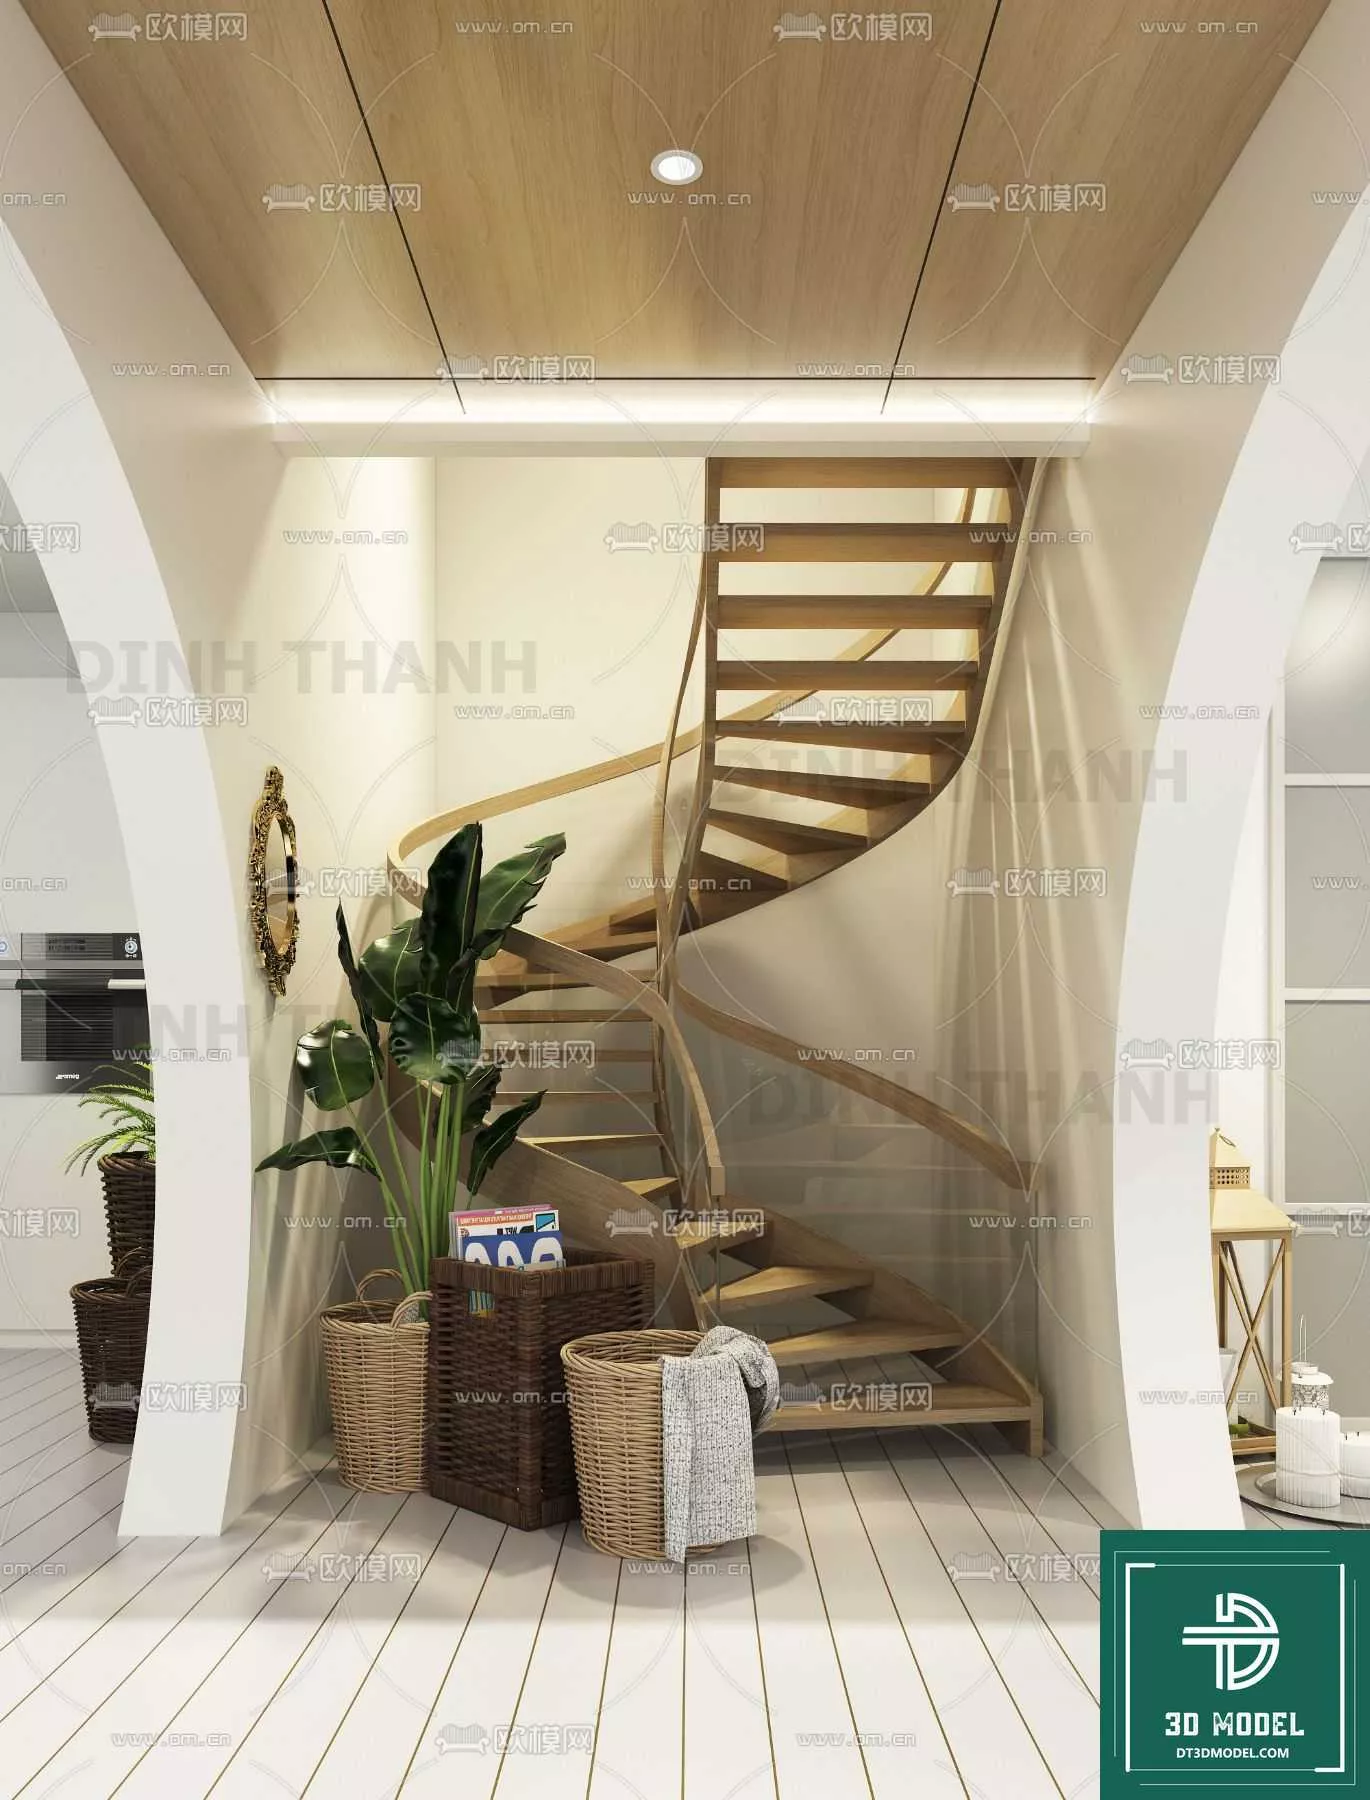 MODERN STAIR - SKETCHUP 3D MODEL - VRAY OR ENSCAPE - ID14149